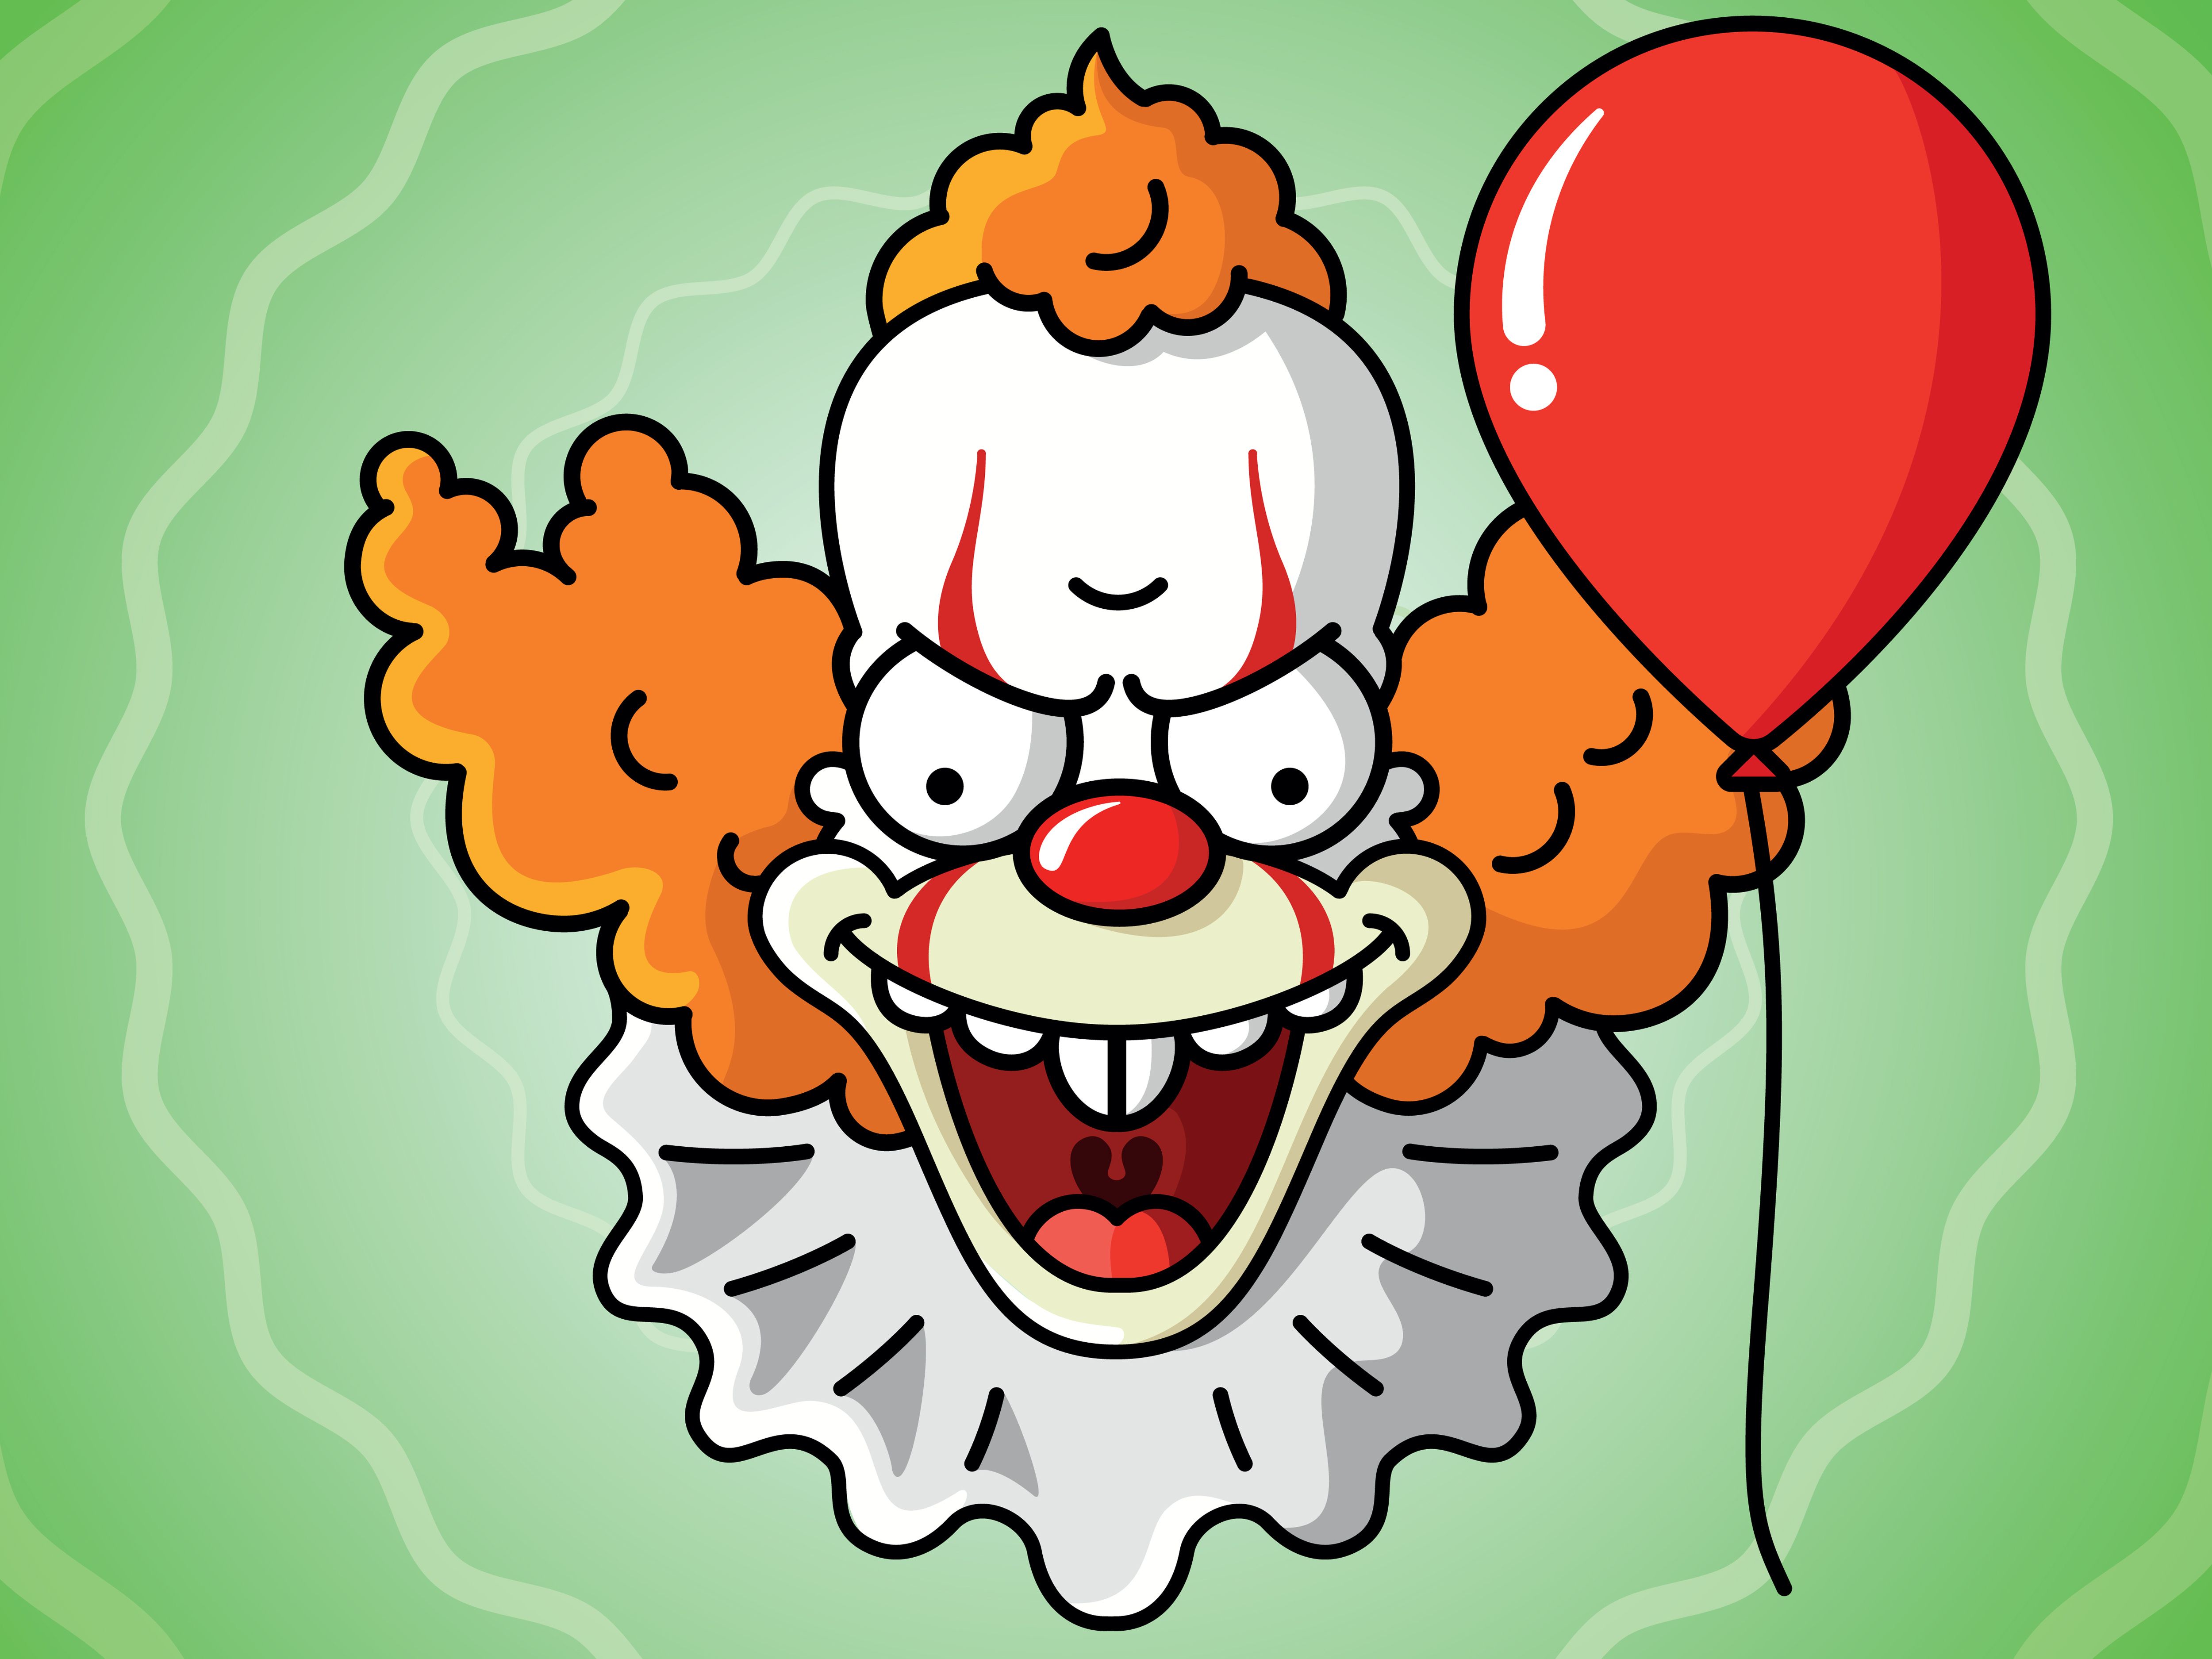 Krusty The Clown Wallpapers Wallpaper Cave Search, discover and share your ...